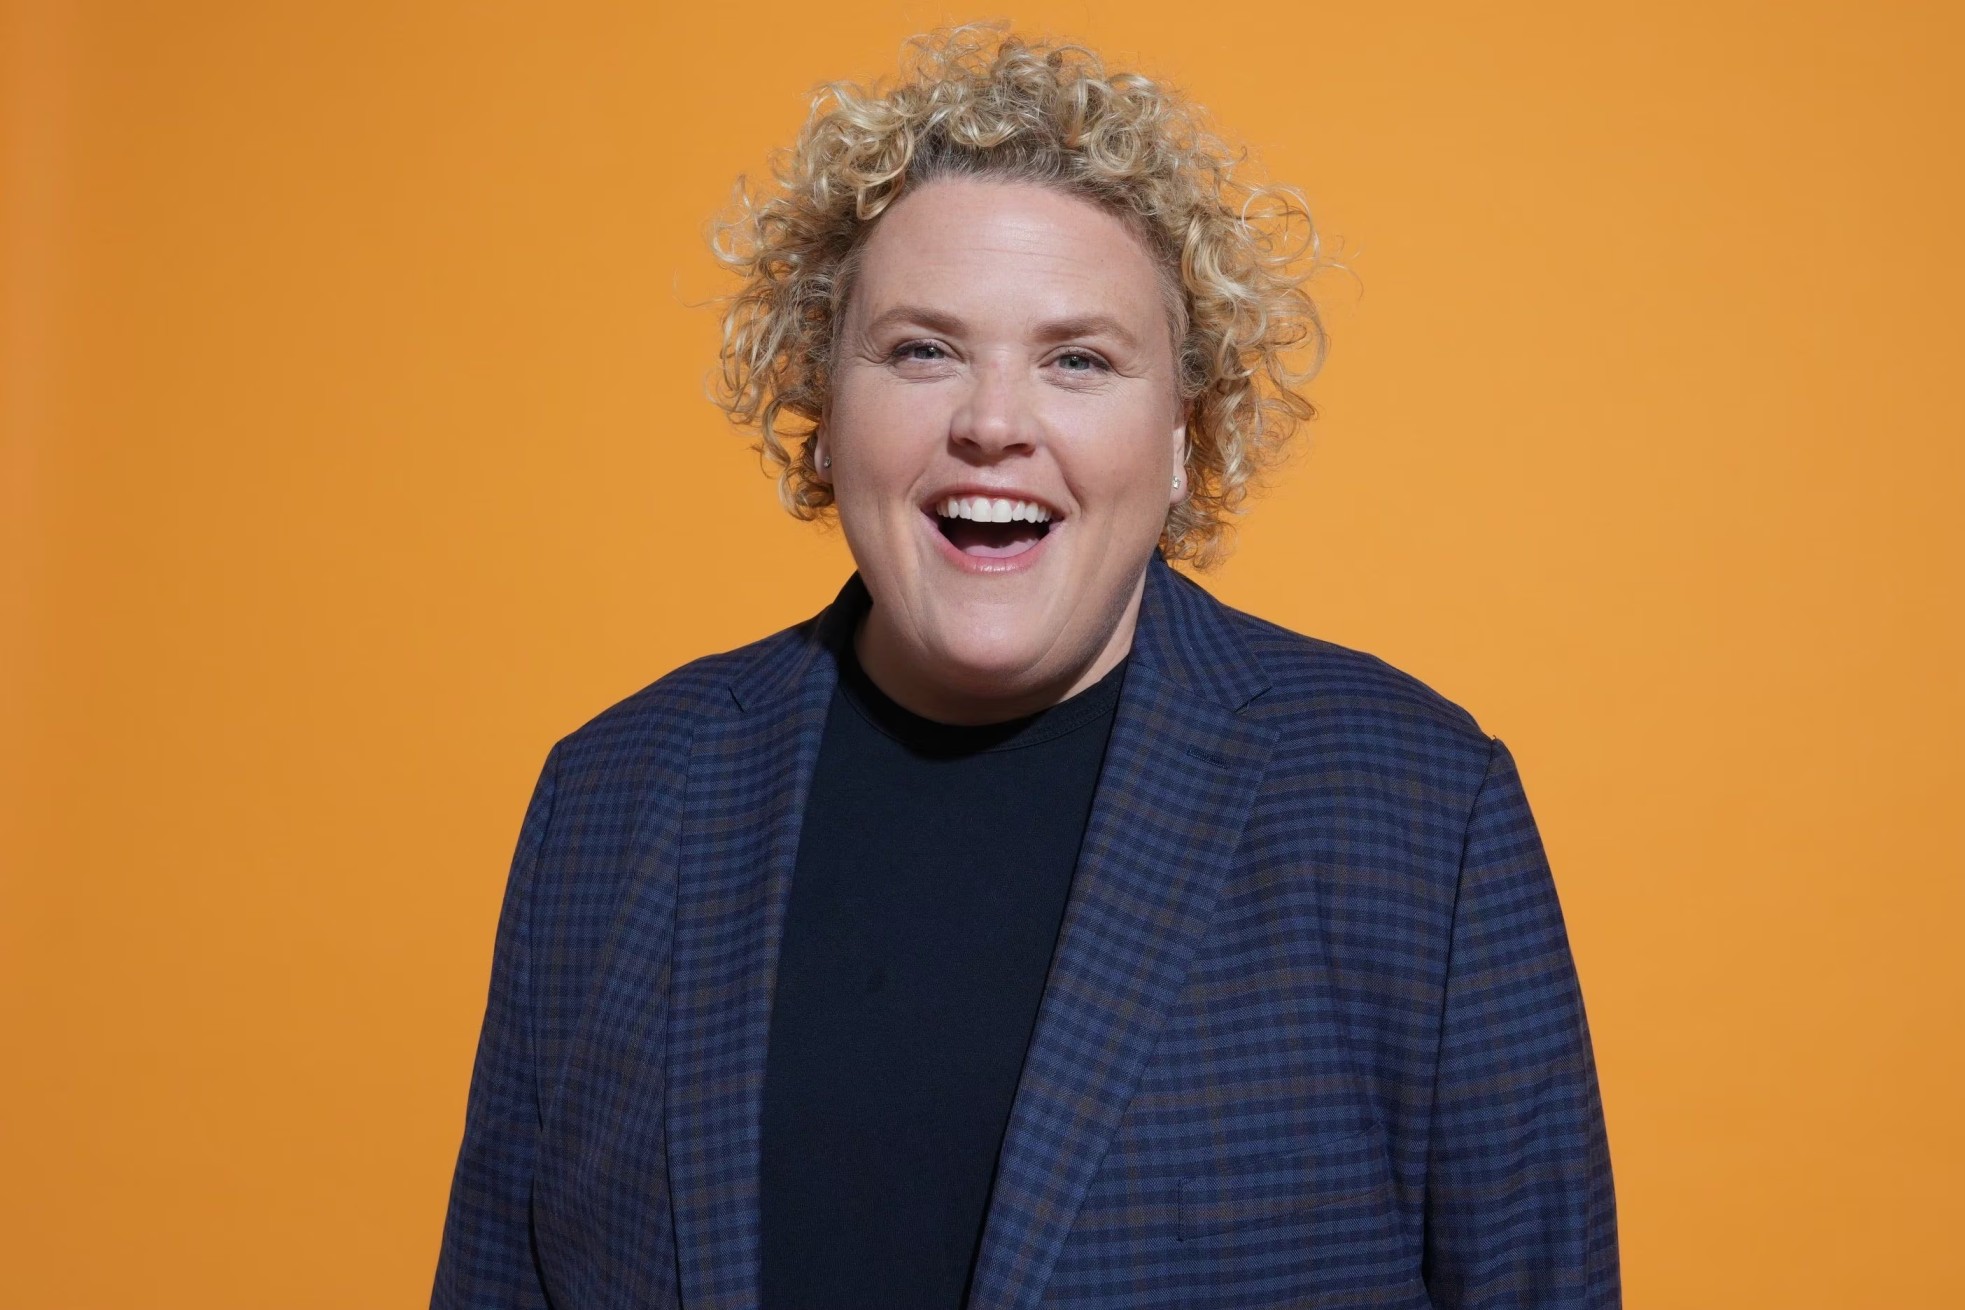 How tall is Fortune Feimster?